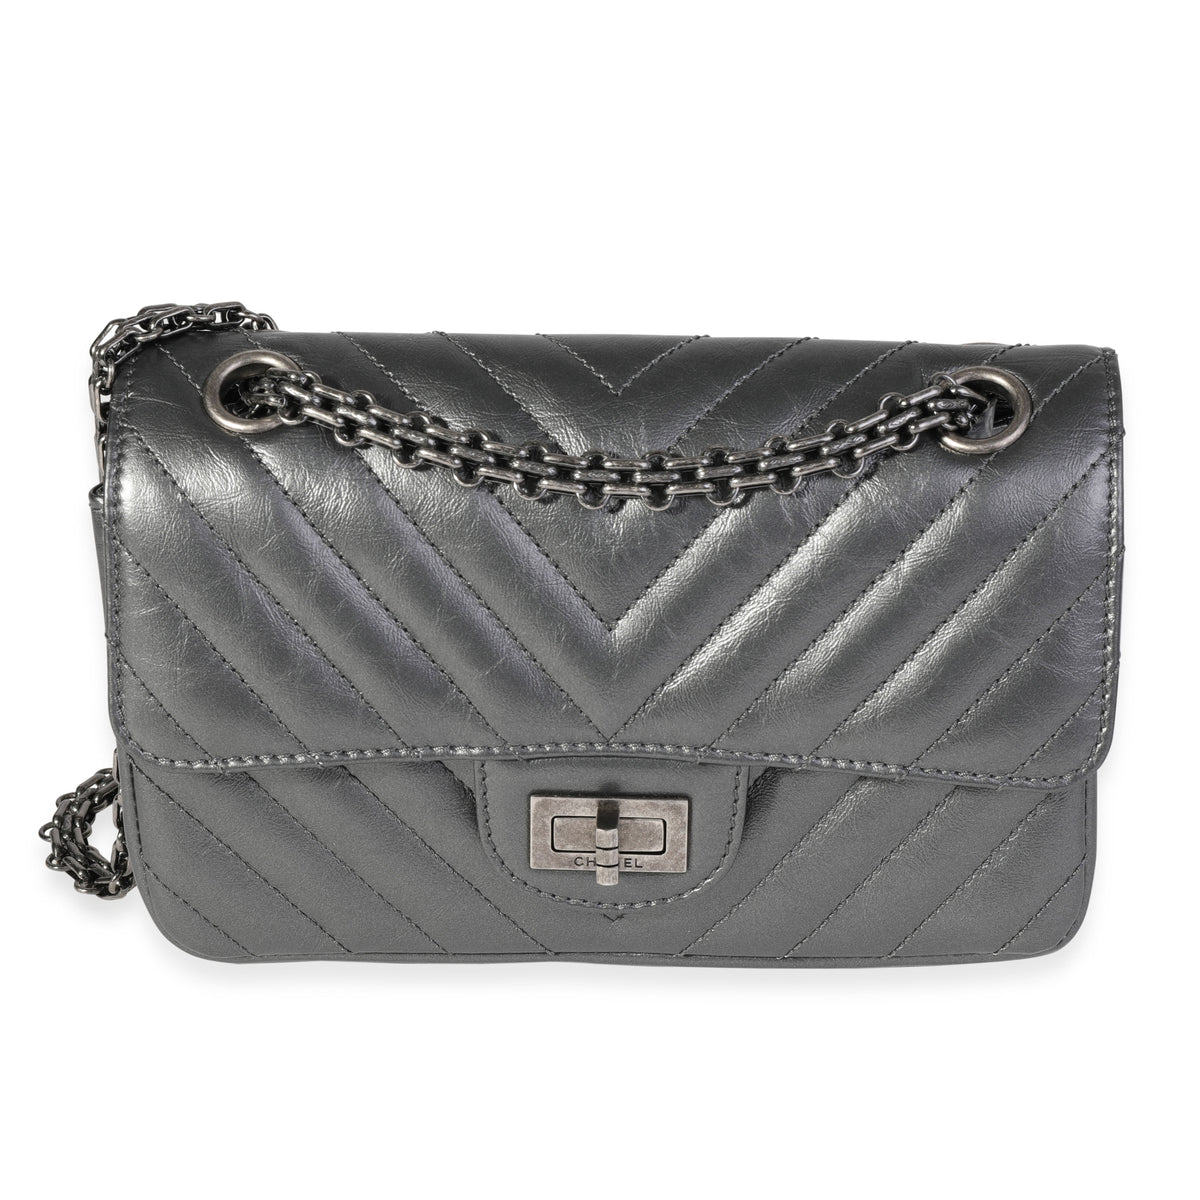 Chanel Boy Quilted Flap Bag in Metallic Patent  Bragmybag